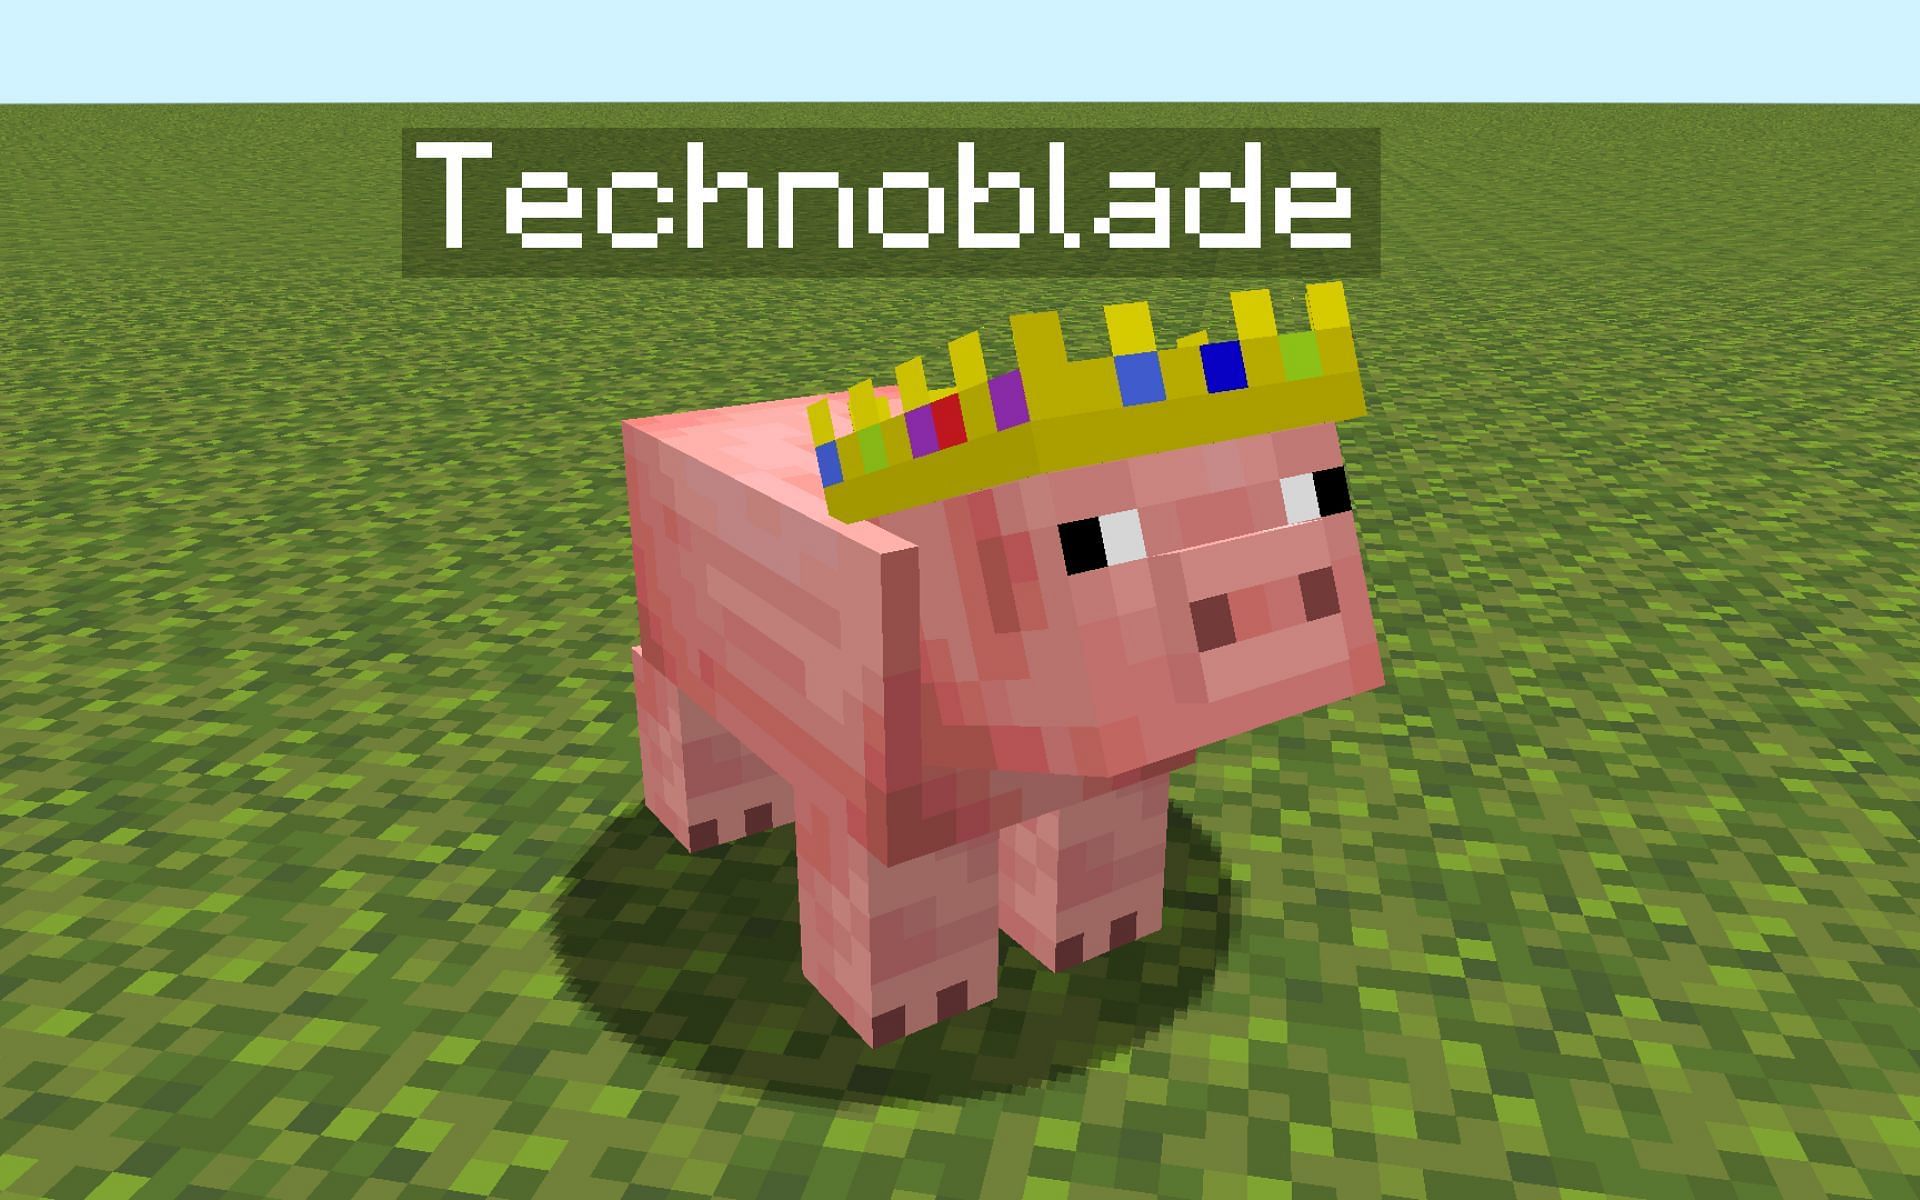 TechnoPig resource pack can be downloaded for Minecraft 1.19 update (Image via phoenixsc.me)